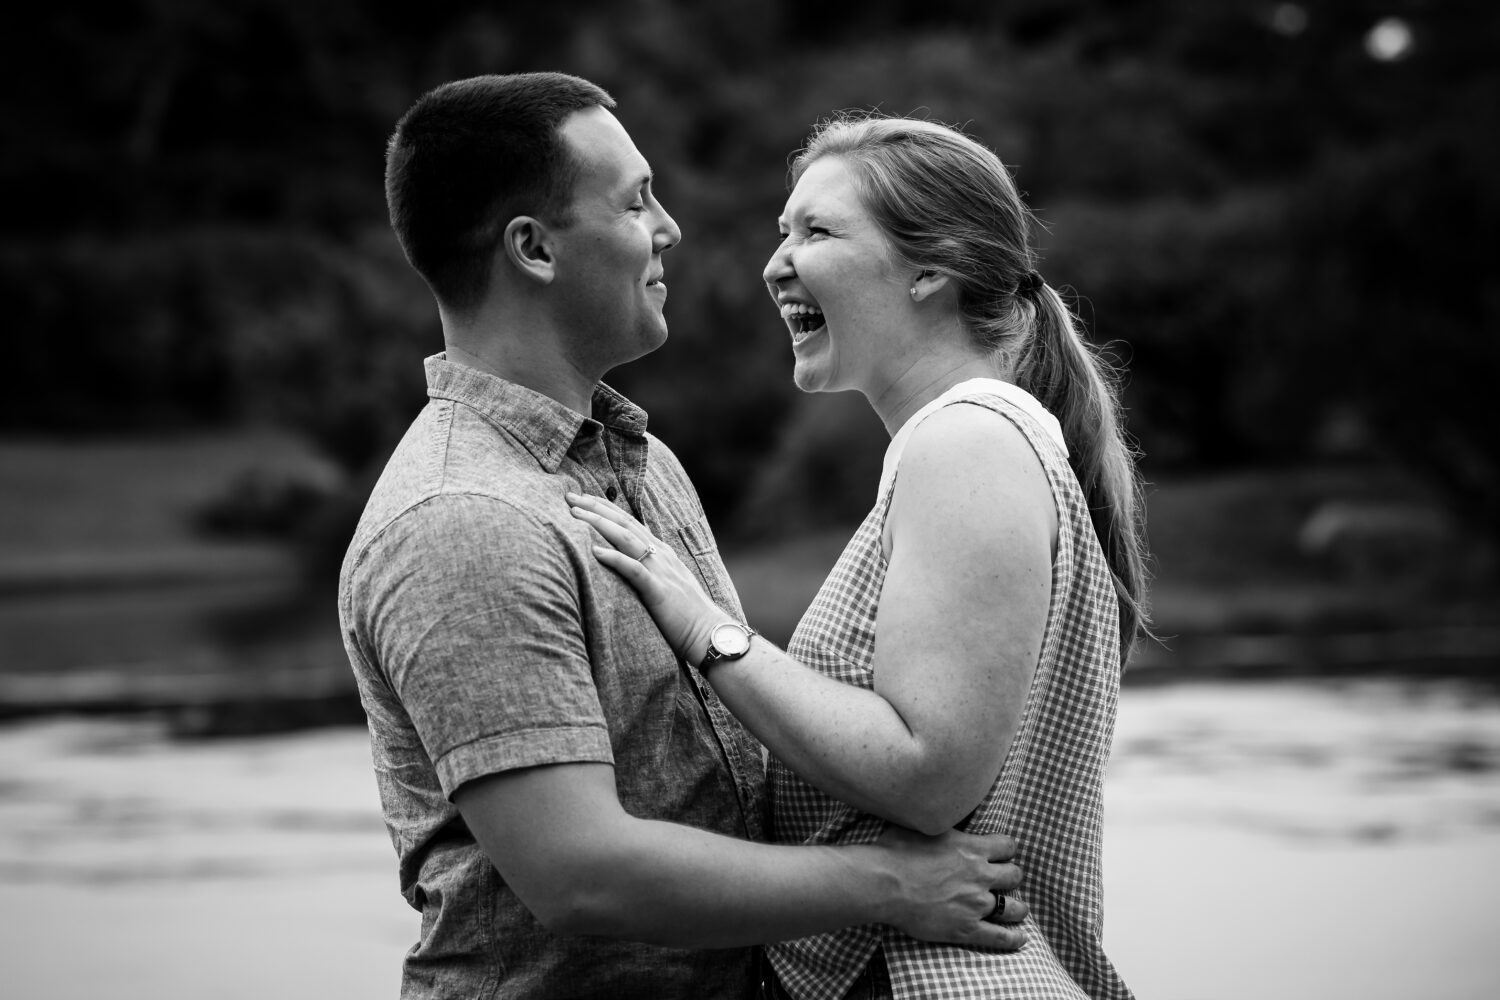 traditional proposal photographer, lisa rhinehart, captures this black and white image of the couple as they are smiling from ear to ear after their proposal inside the Missouri botanical gardens in st louis missouri